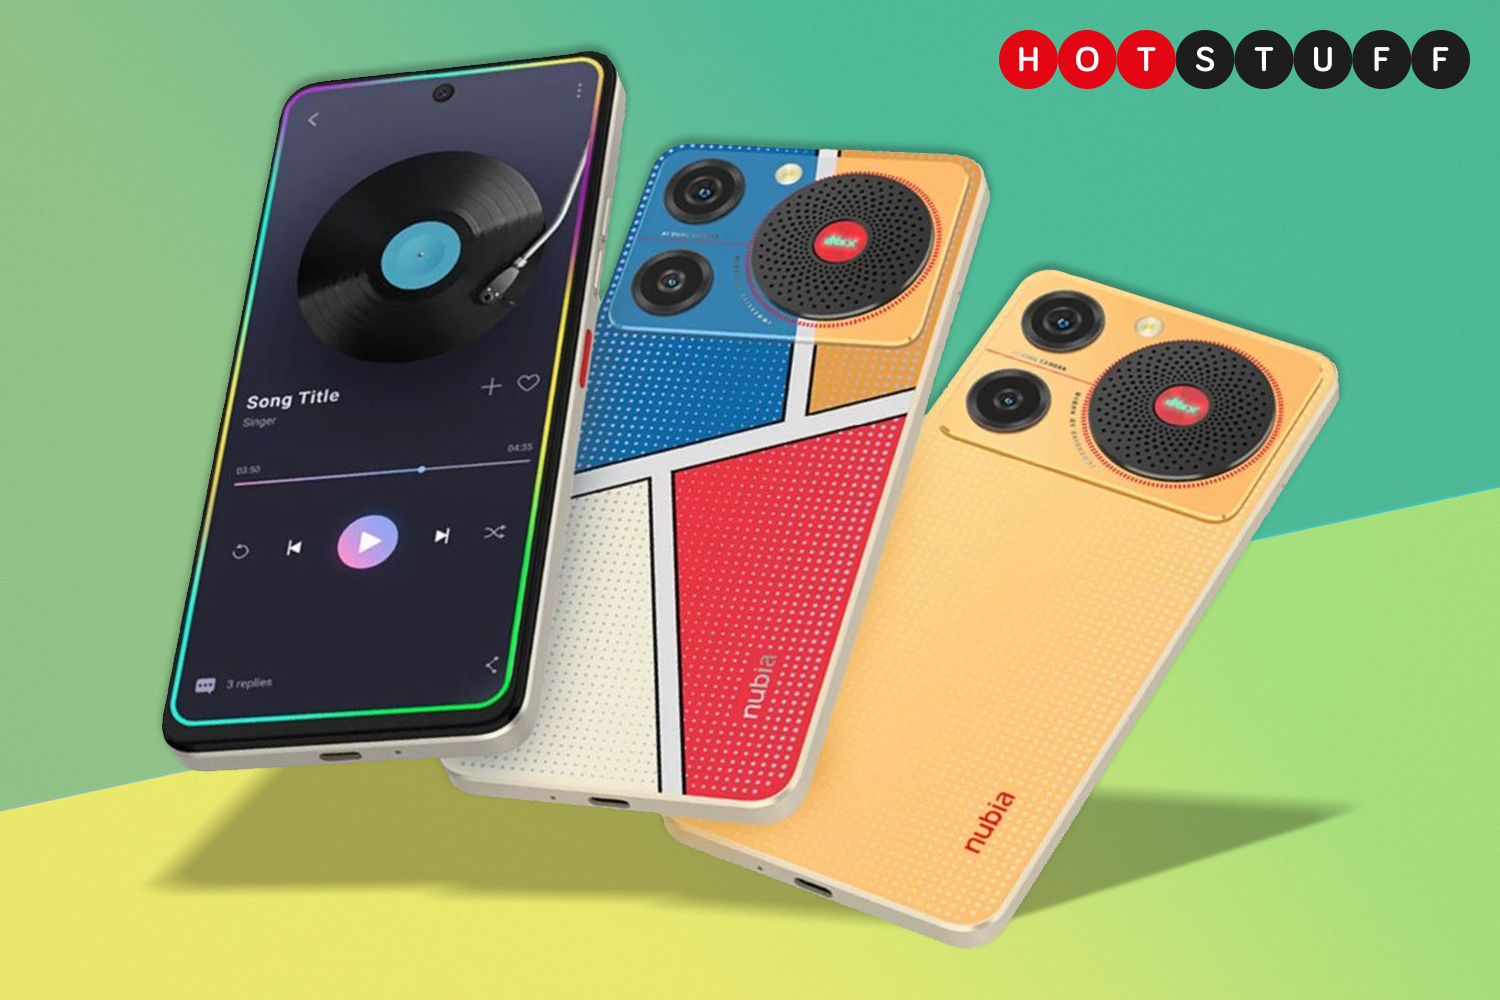 The headline pretty much sums it up, but the Nubia Music is a wild smartphone that’s all about the sound — namely a huge rear speaker that’s cap